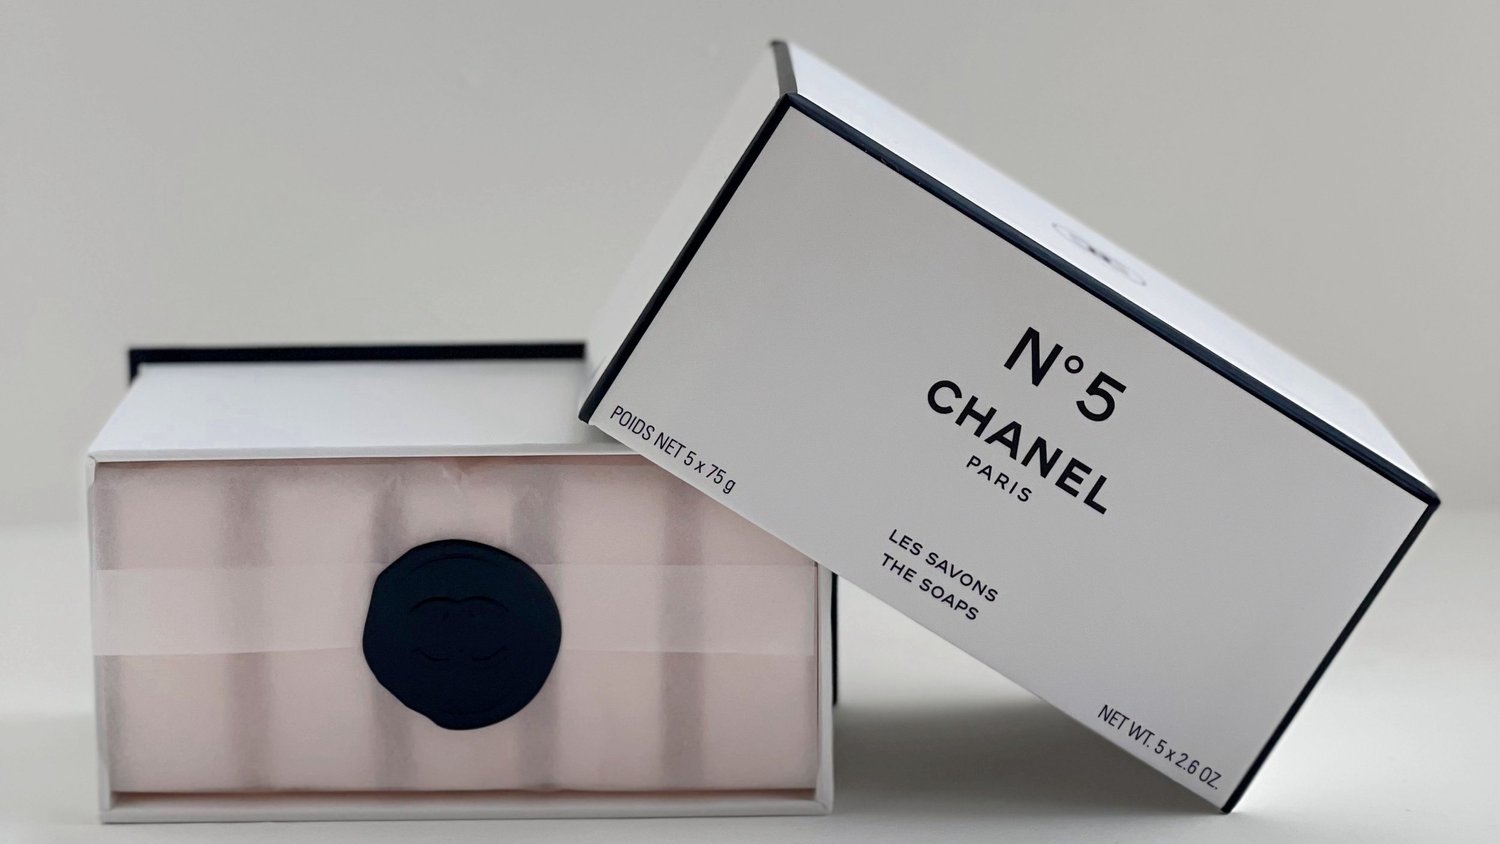 CHANEL] Chanel Soap Stone No.5 Unisex with Savon case and other